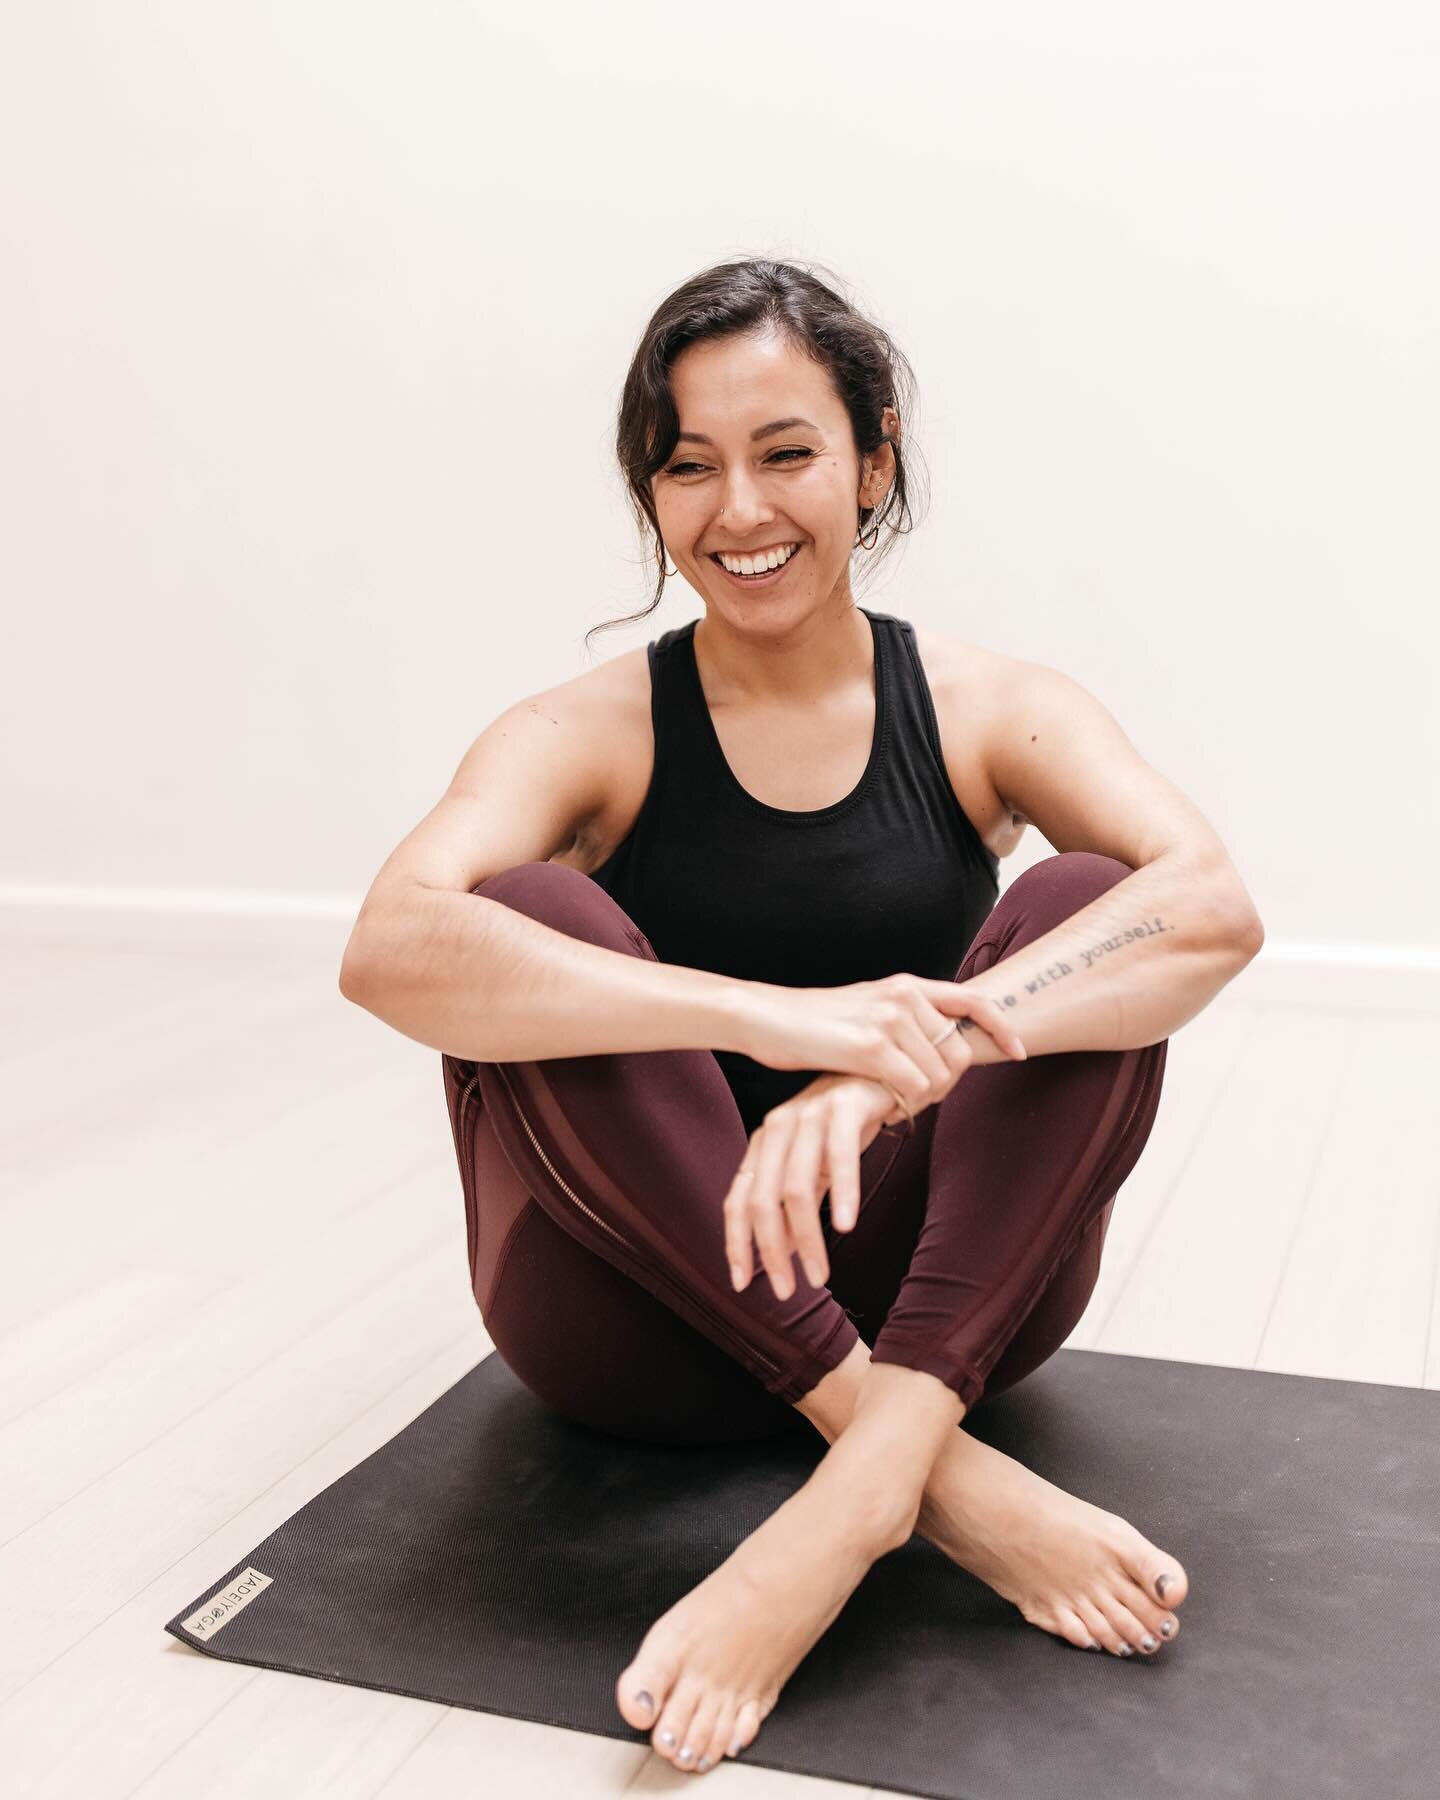 You can now practice with Rose not only Tuesdays at 4:30pm, but now Thursdays at 4:30pm too! Join Rose on the mat for Vinyasa flow. We know you&rsquo;ll enjoy your time on the mat with her and her creative flows🩵